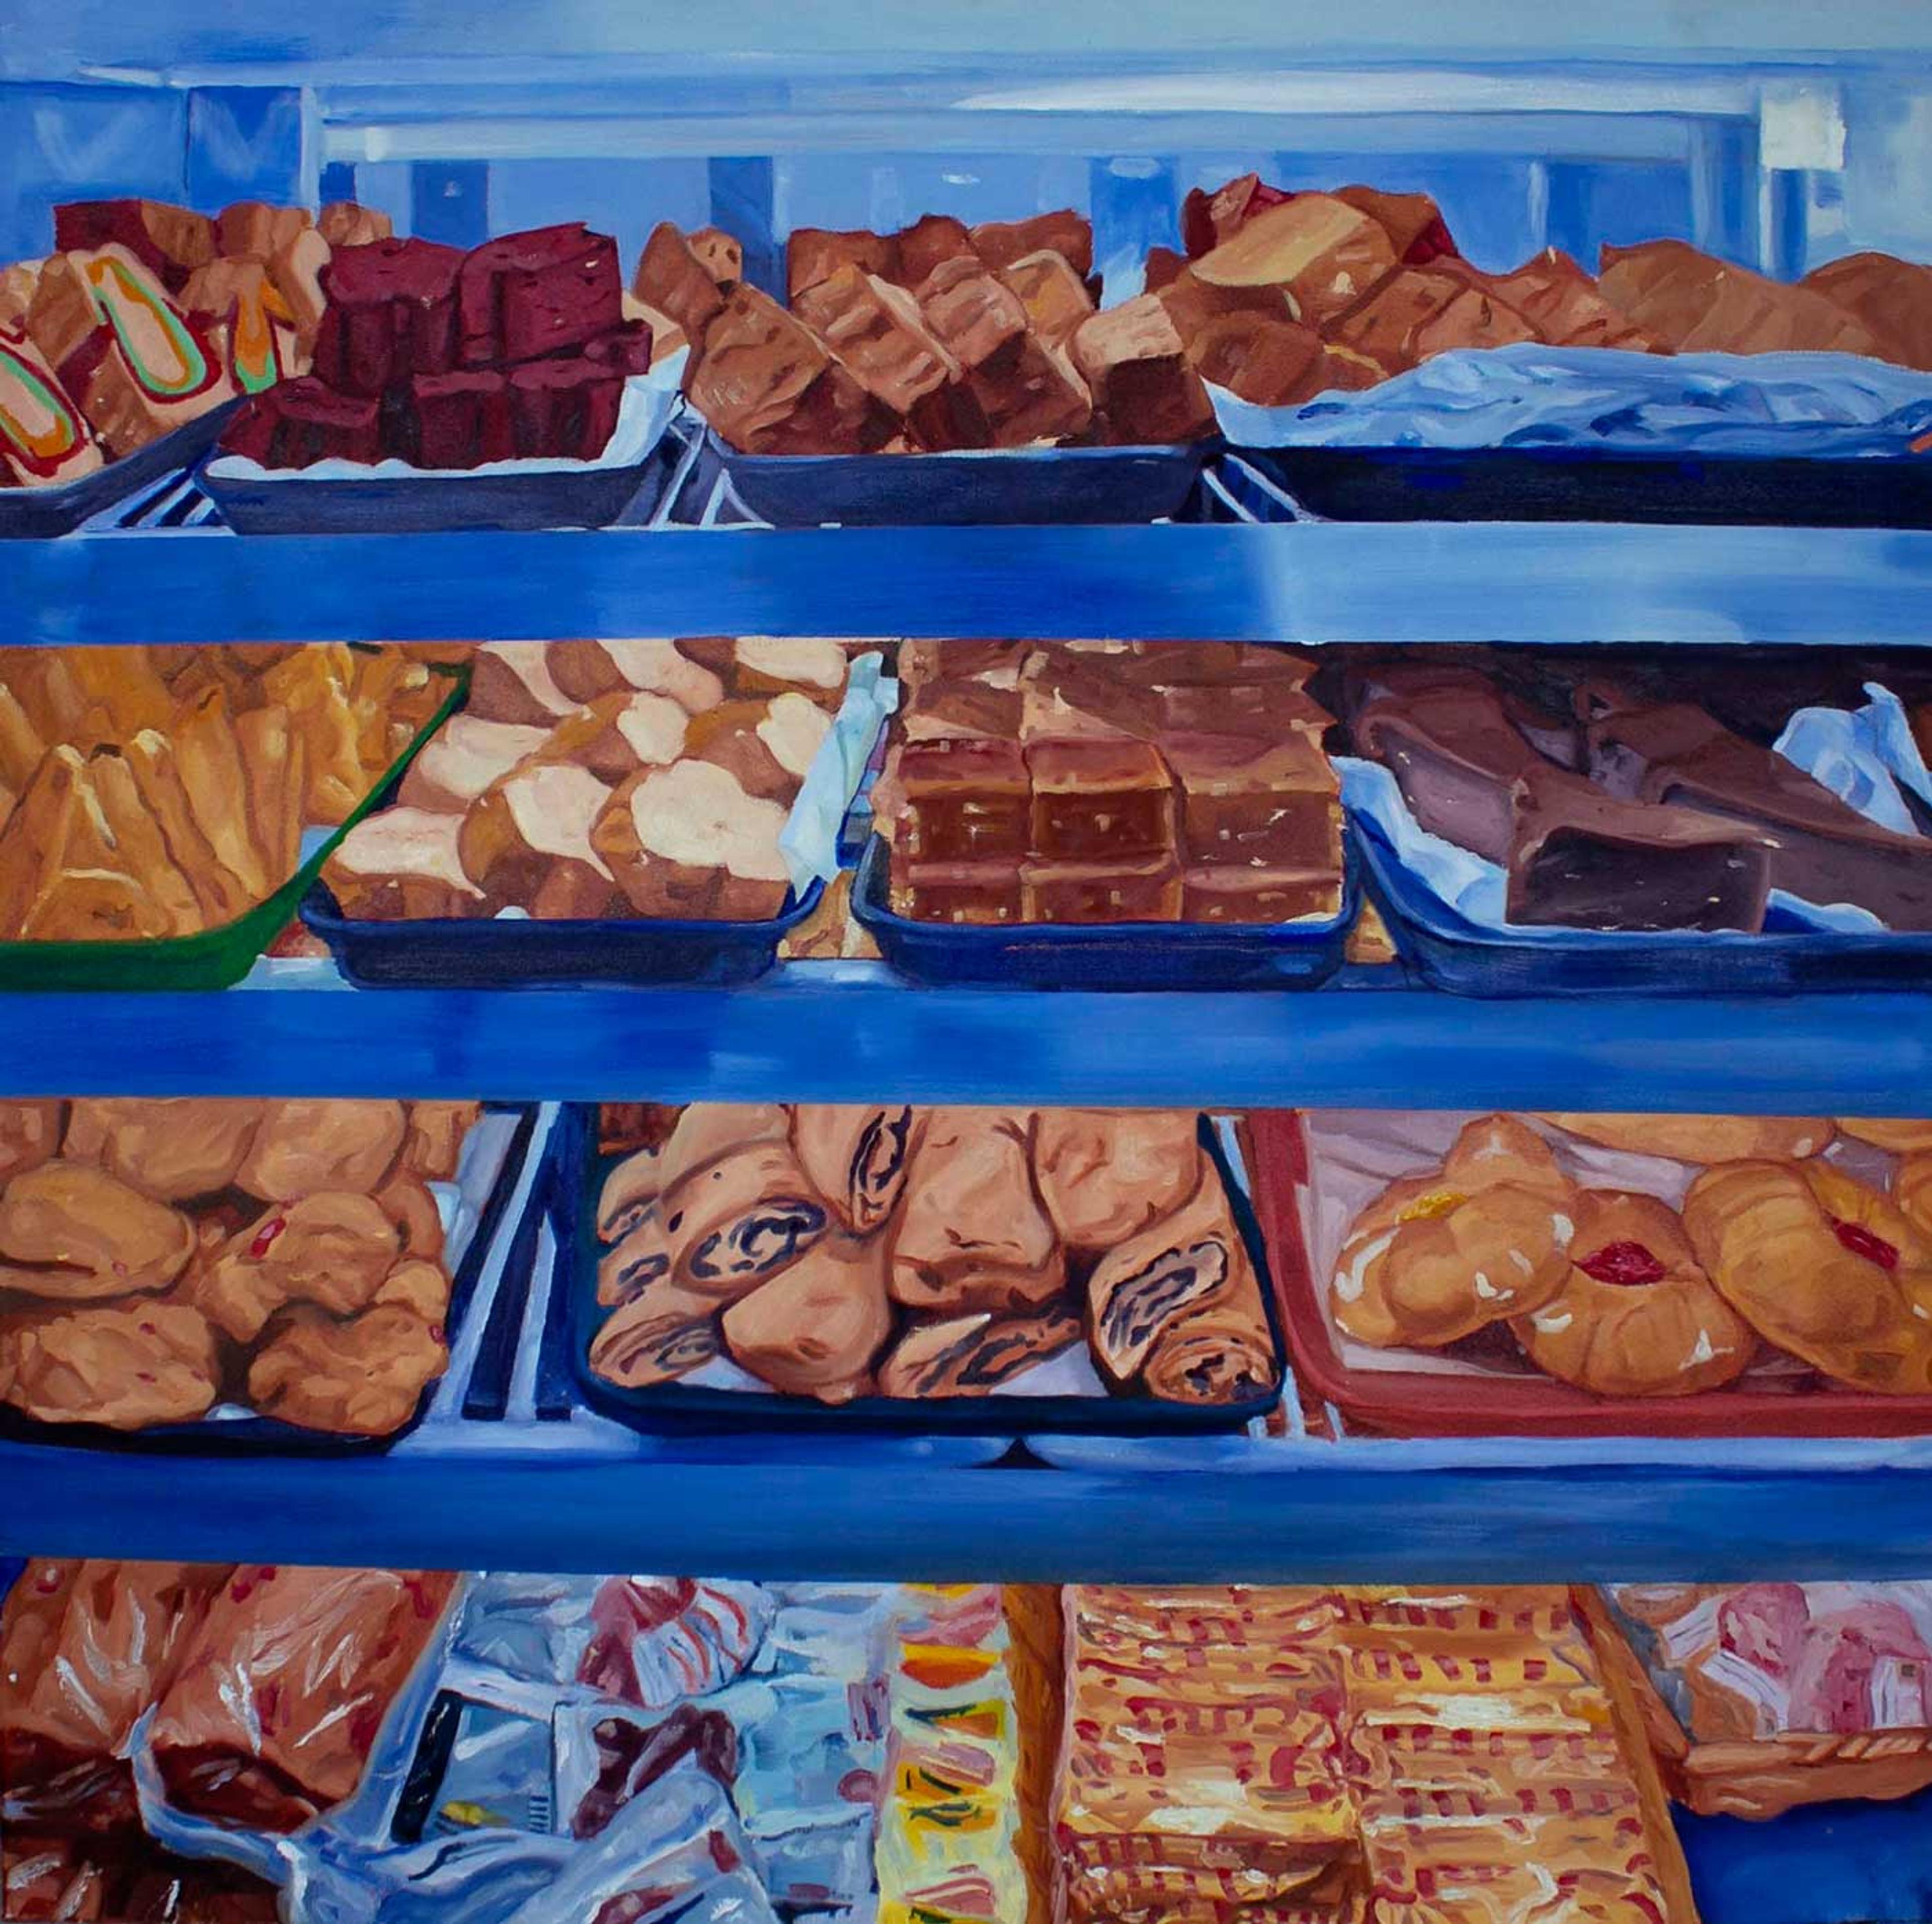 Painting of a bakery display.